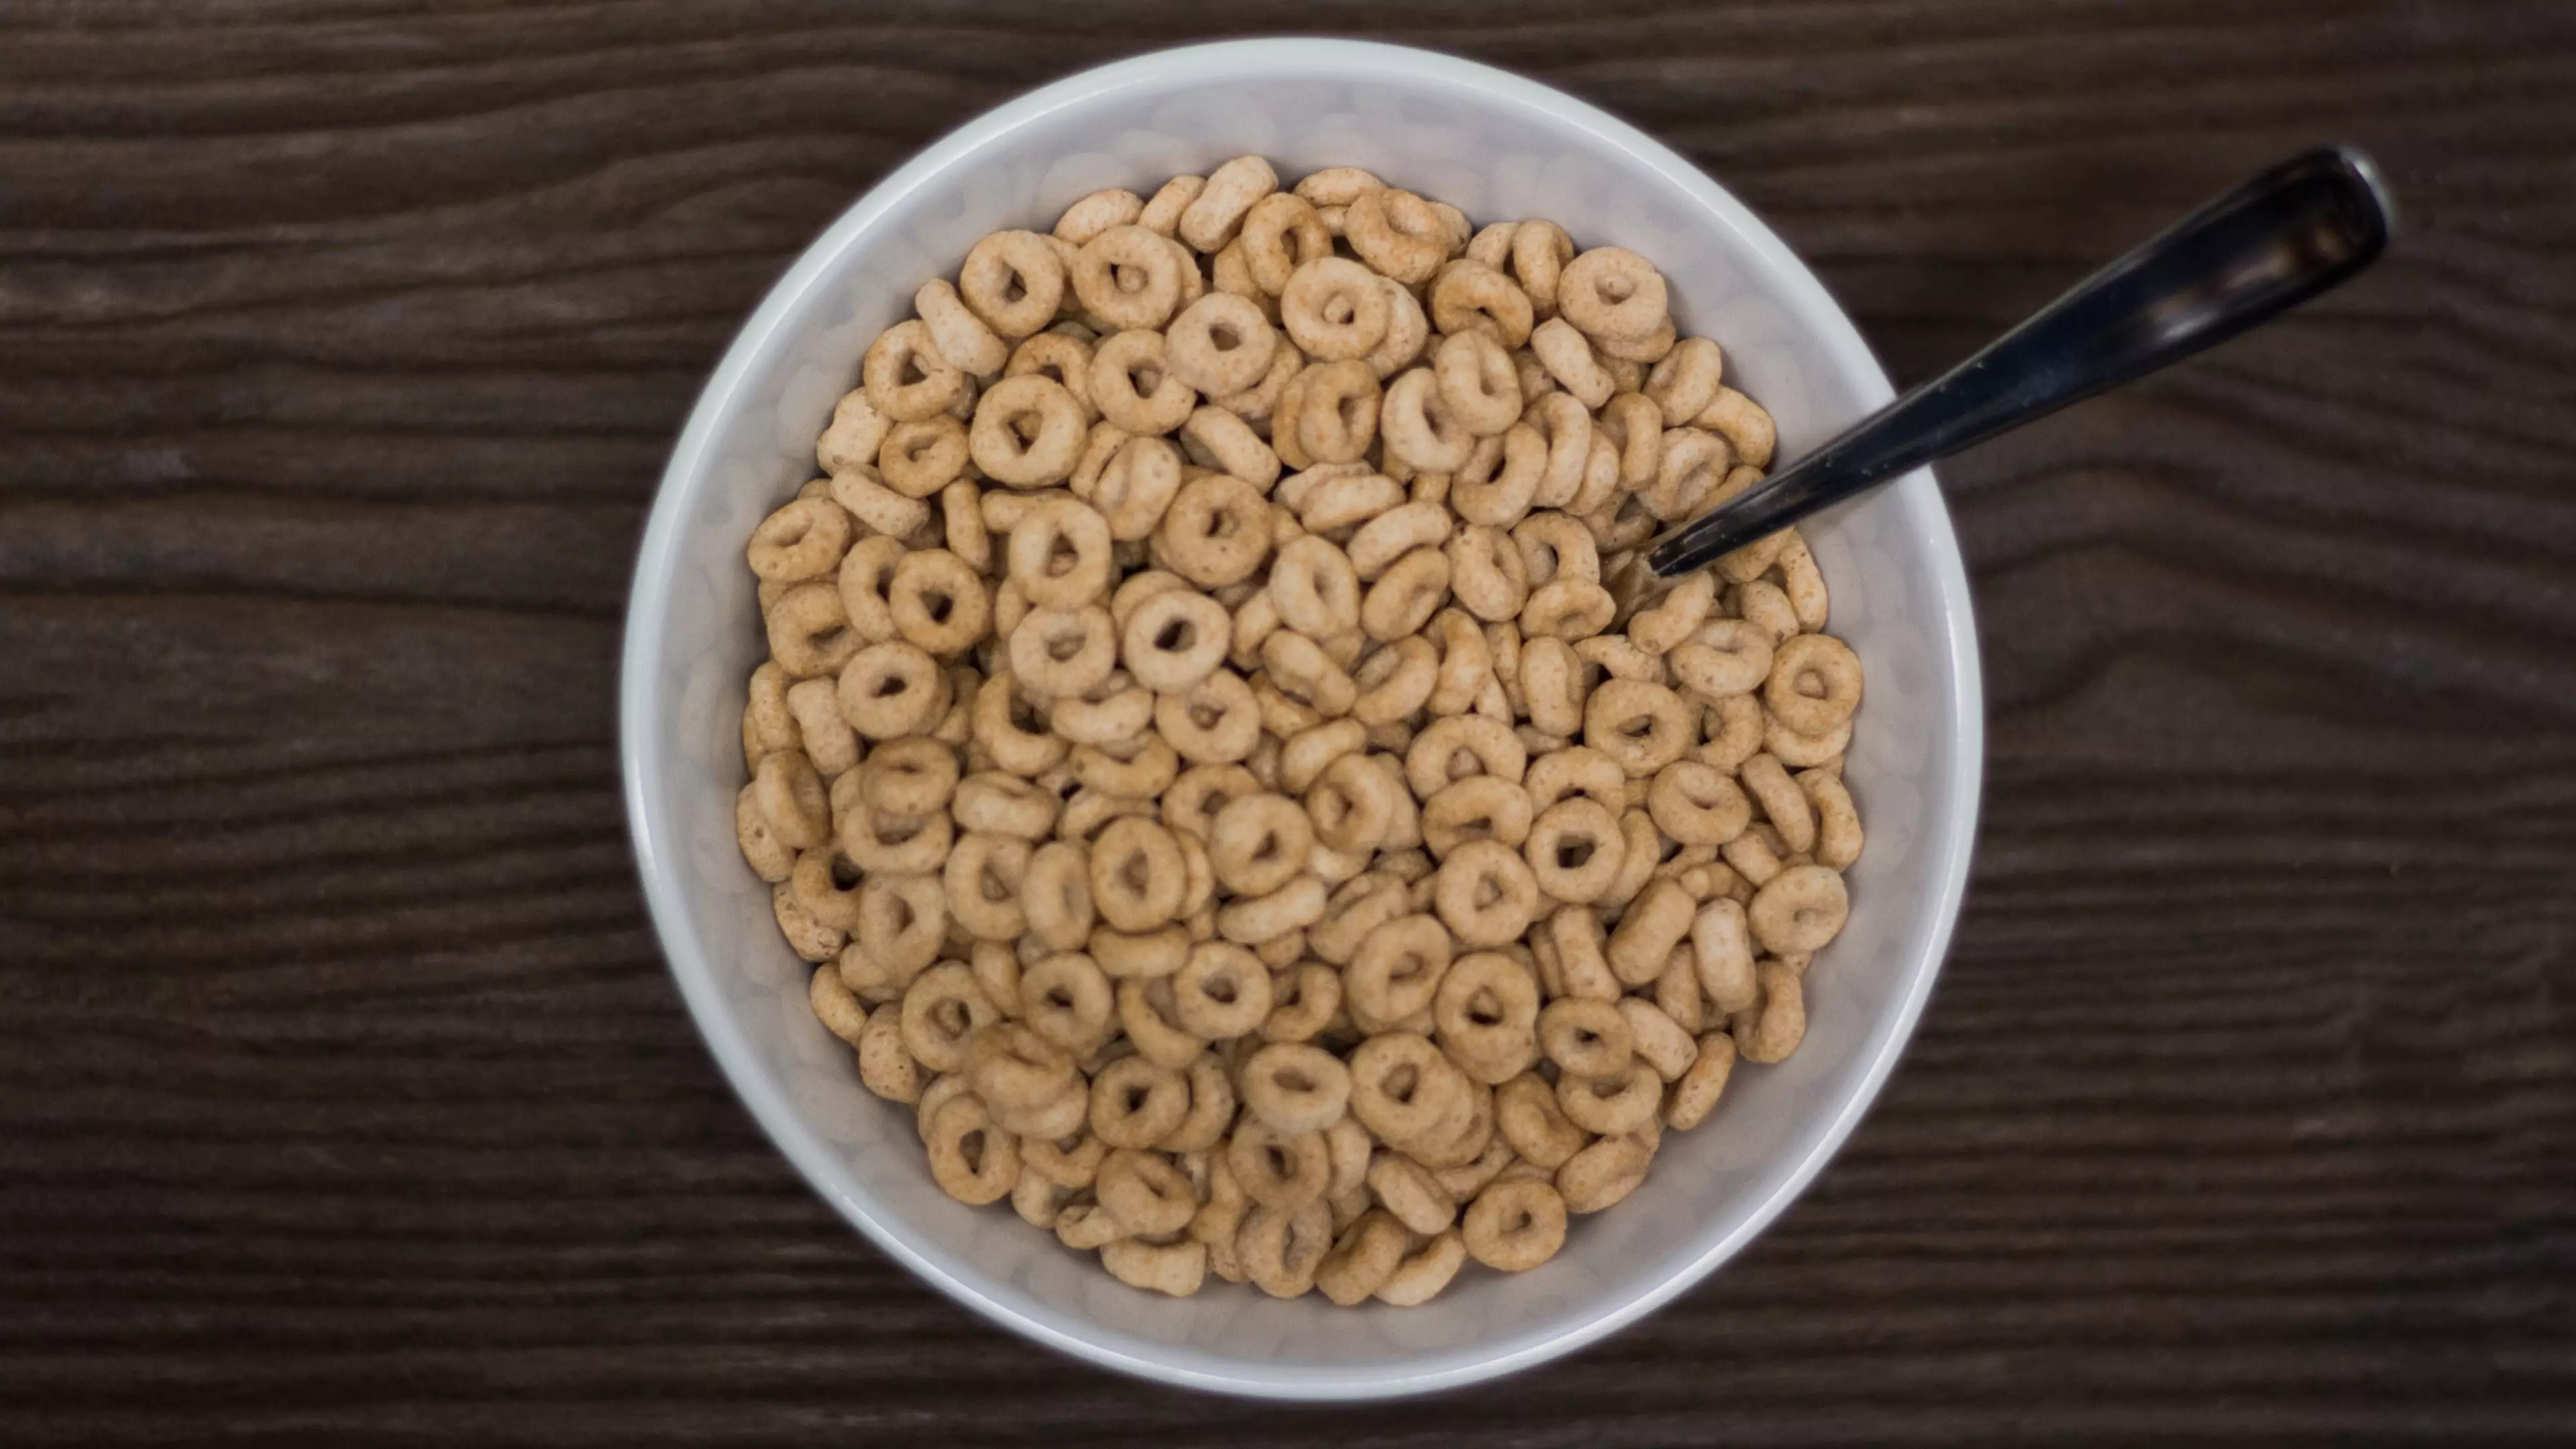 People Are Freezing Cereal As It Tastes Better